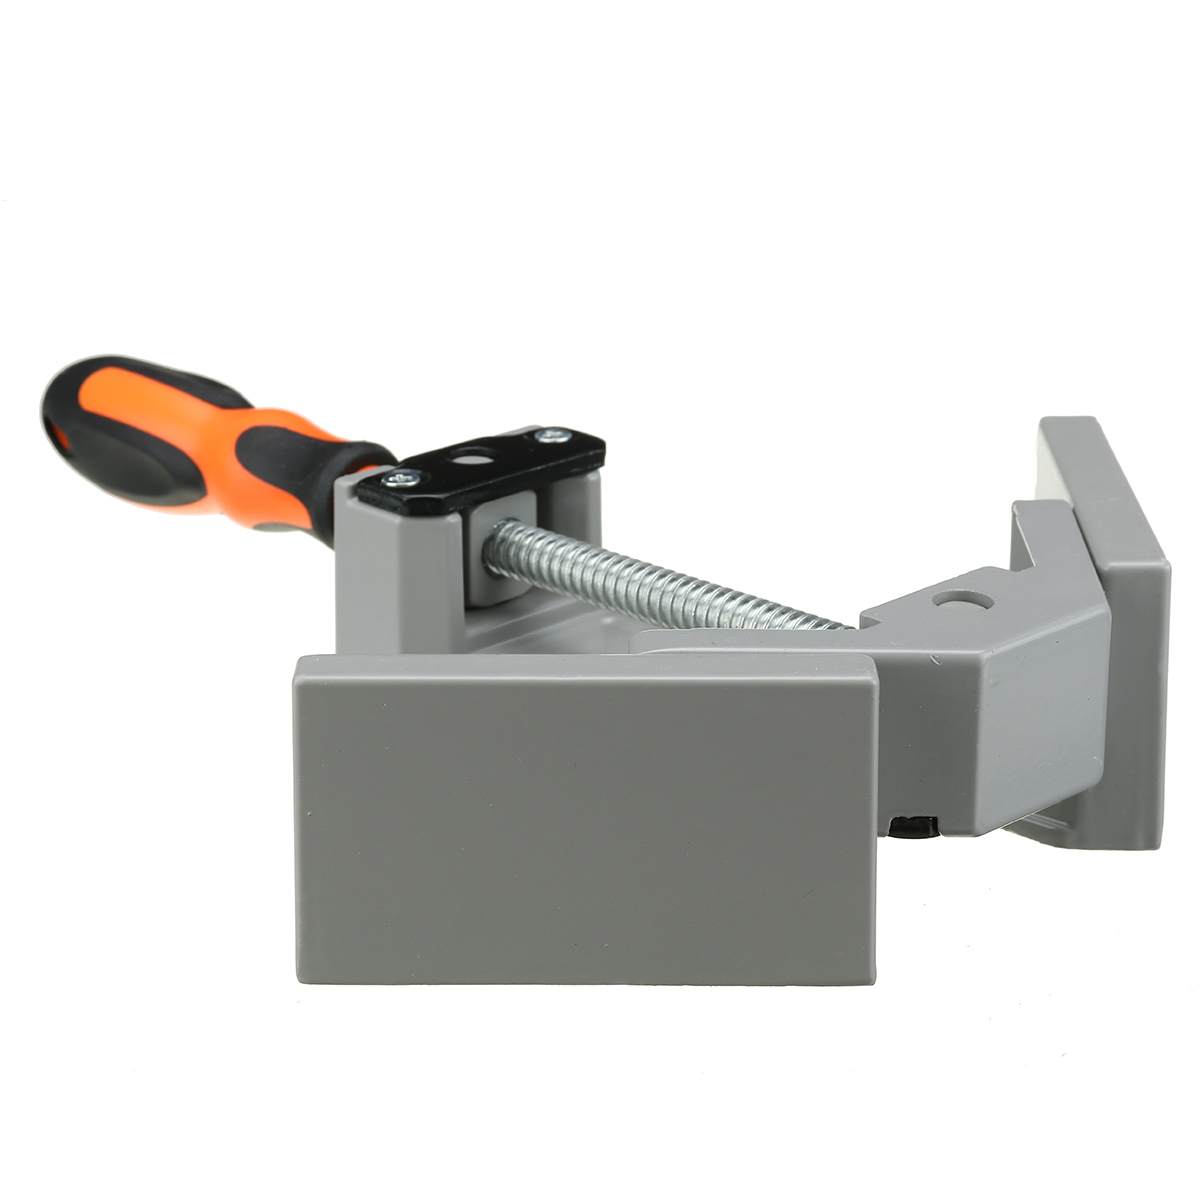 90-Degree-Quick-Release-Corner-Clamp-Right-Angle-Welding-Woodworking-Photo-Frame-Clamping-Tool-1768833-8